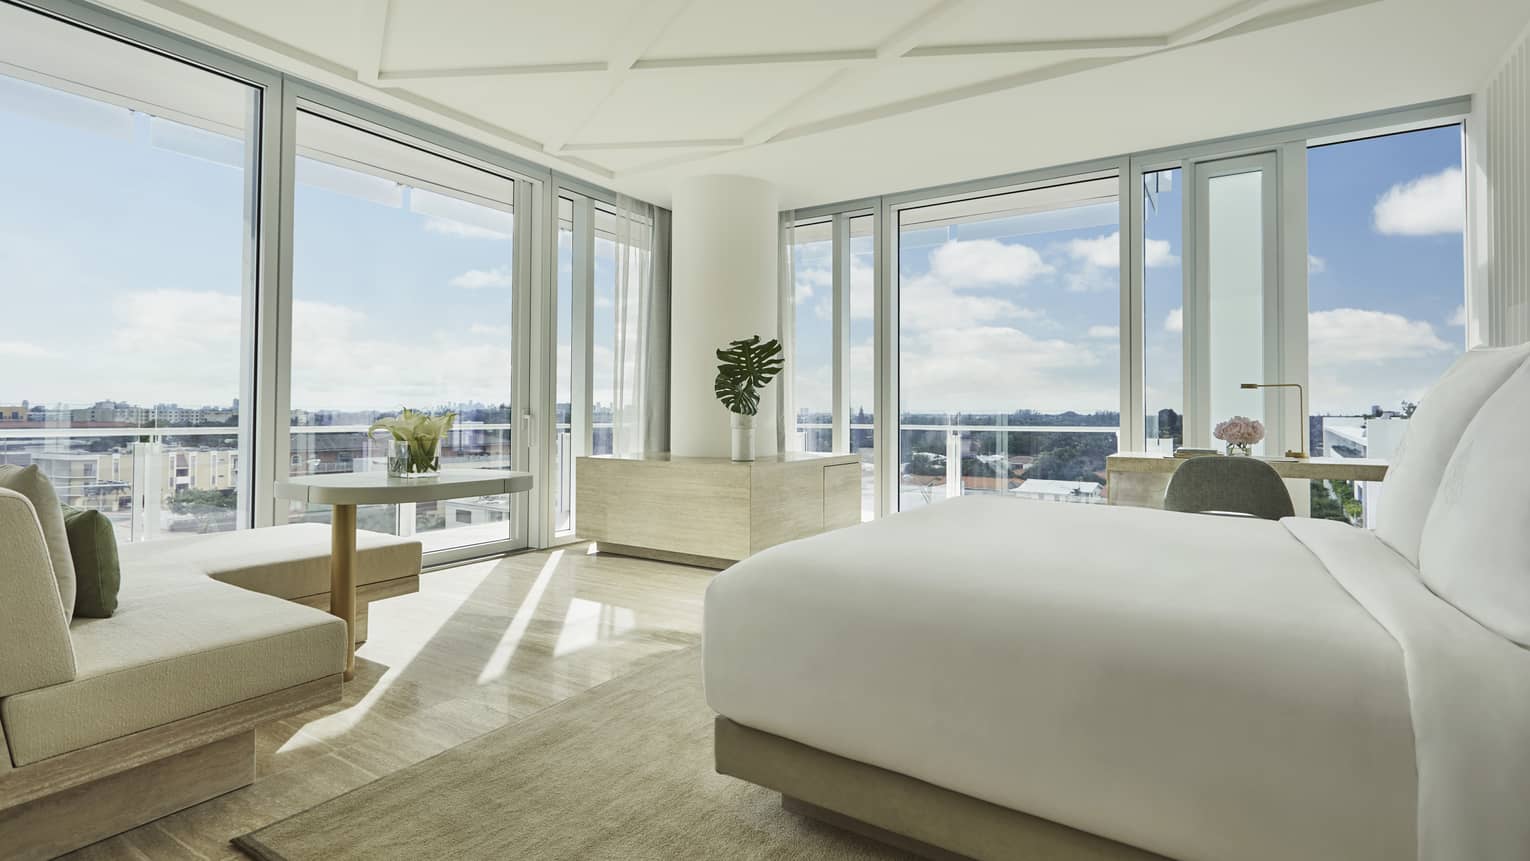 Sunset Studio Suite with modern white bed and chaise, and floor-to-ceiling windows with expansive views